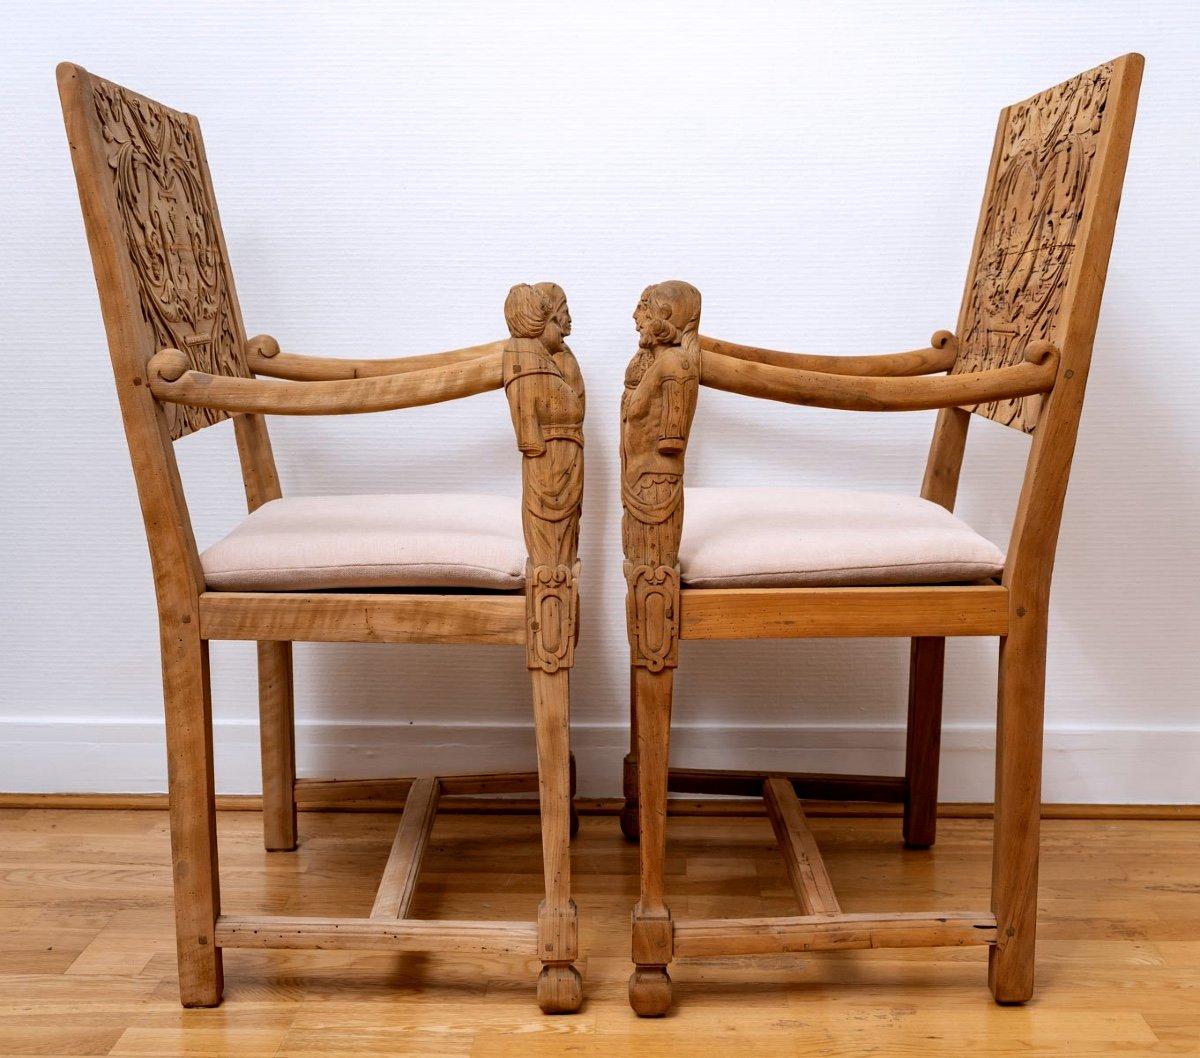 Renaissance Pair of Neo-Gothic Ceremonial Armchairs, Solid Walnut, Period: 19th Century For Sale